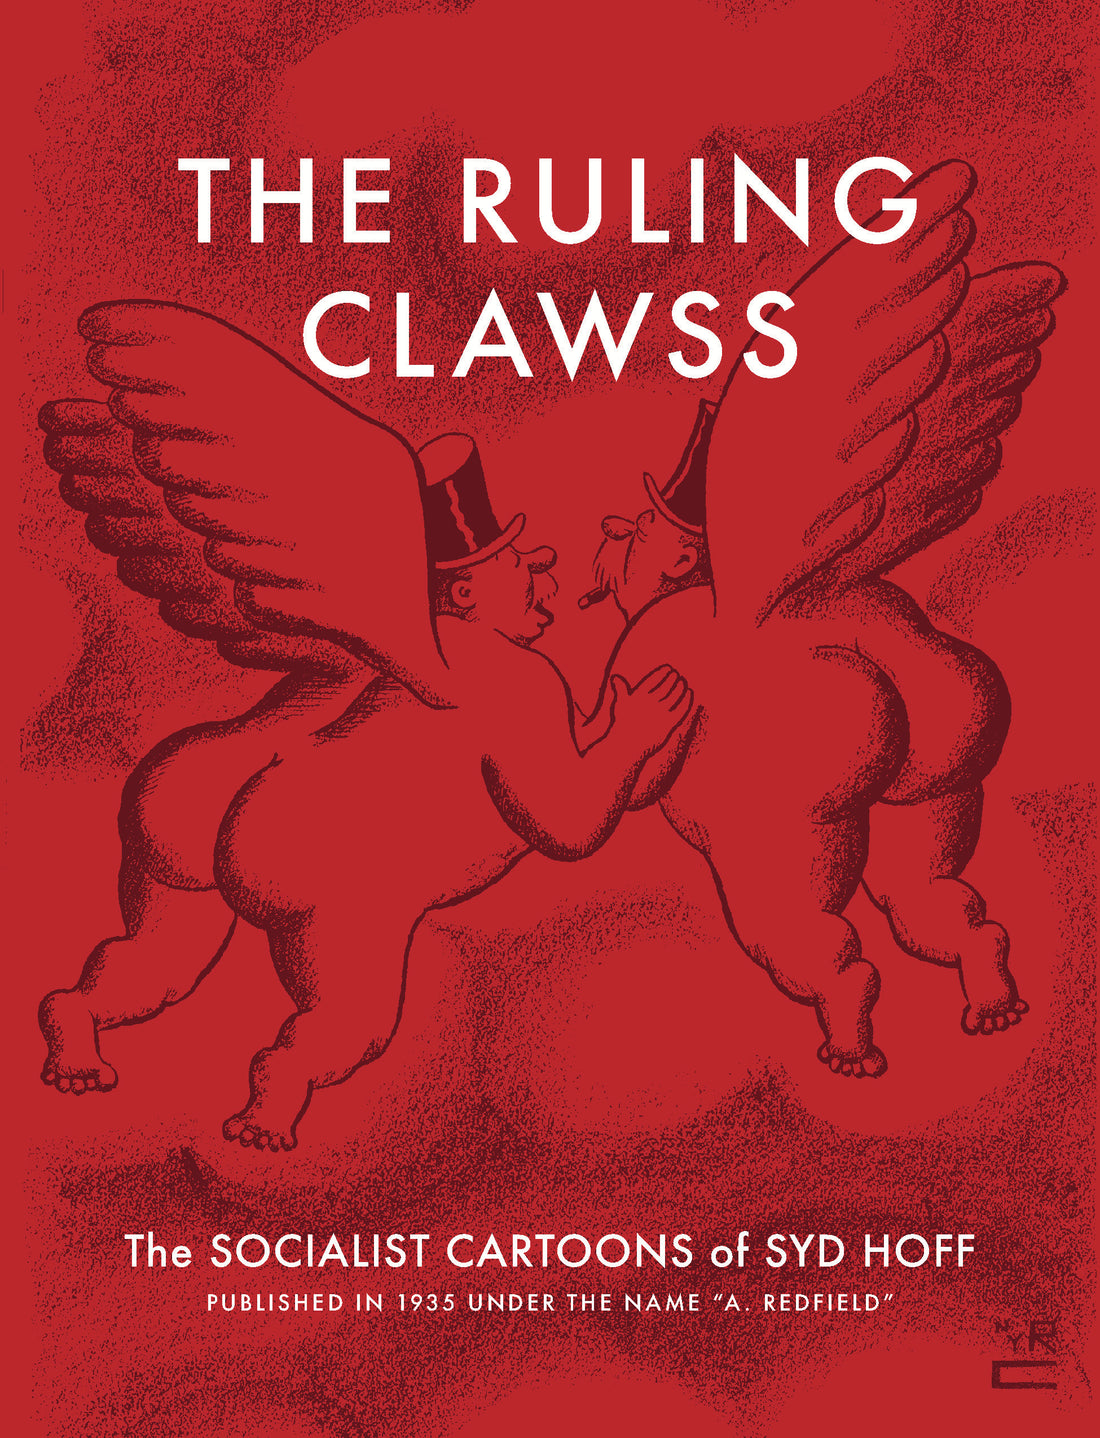 ‘The Ruling Clawss’ Featured in Jacobin